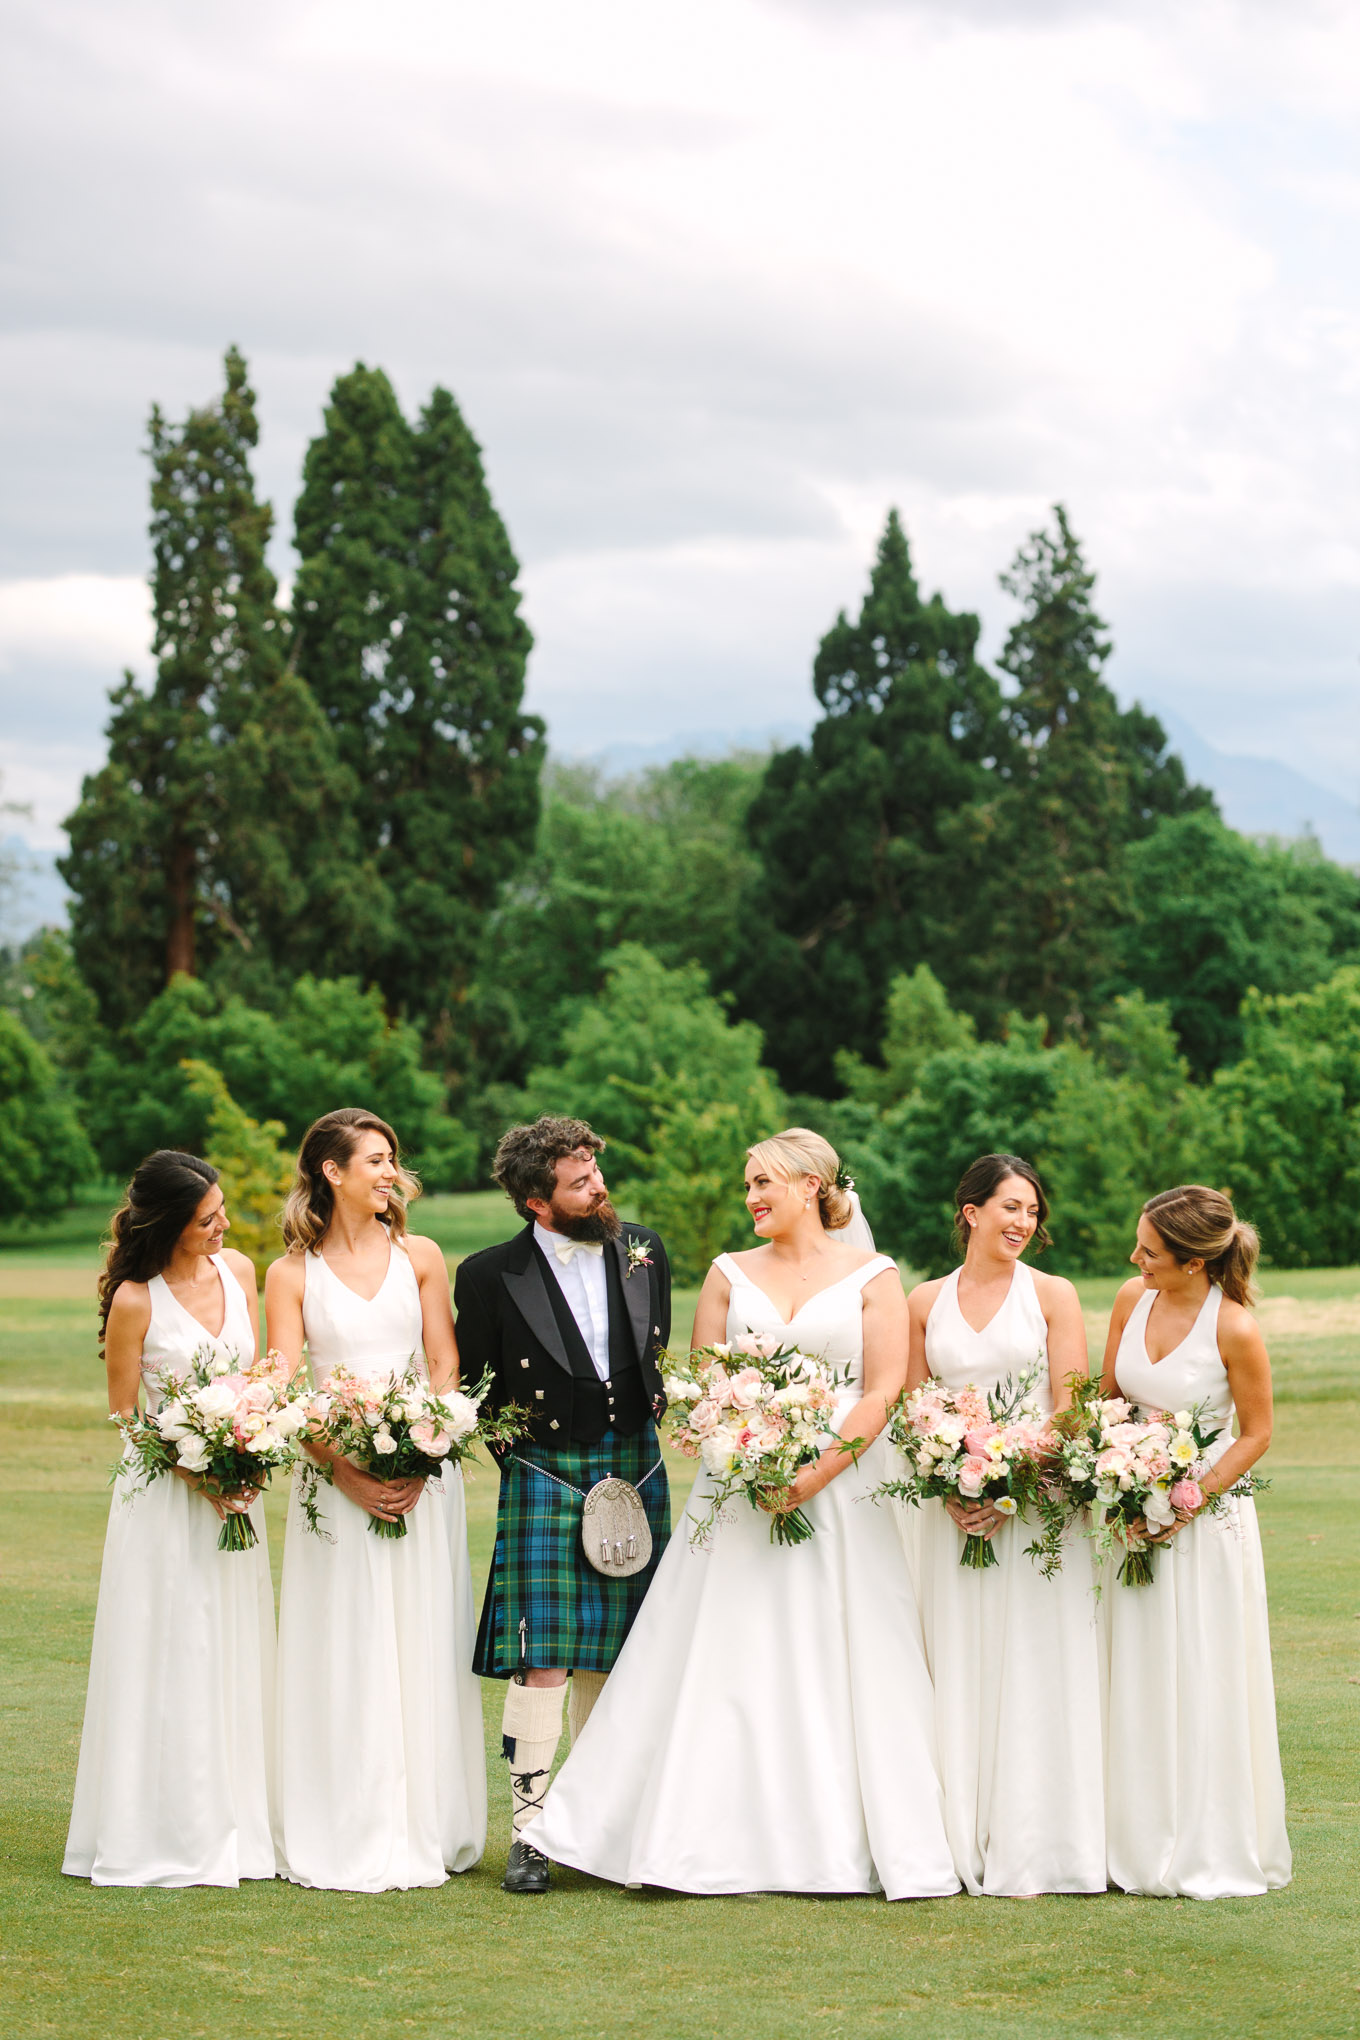 Bridal party with best man in traditional Scottish kilt. Millbrook Resort Queenstown New Zealand wedding by Mary Costa Photography | www.marycostaweddings.com